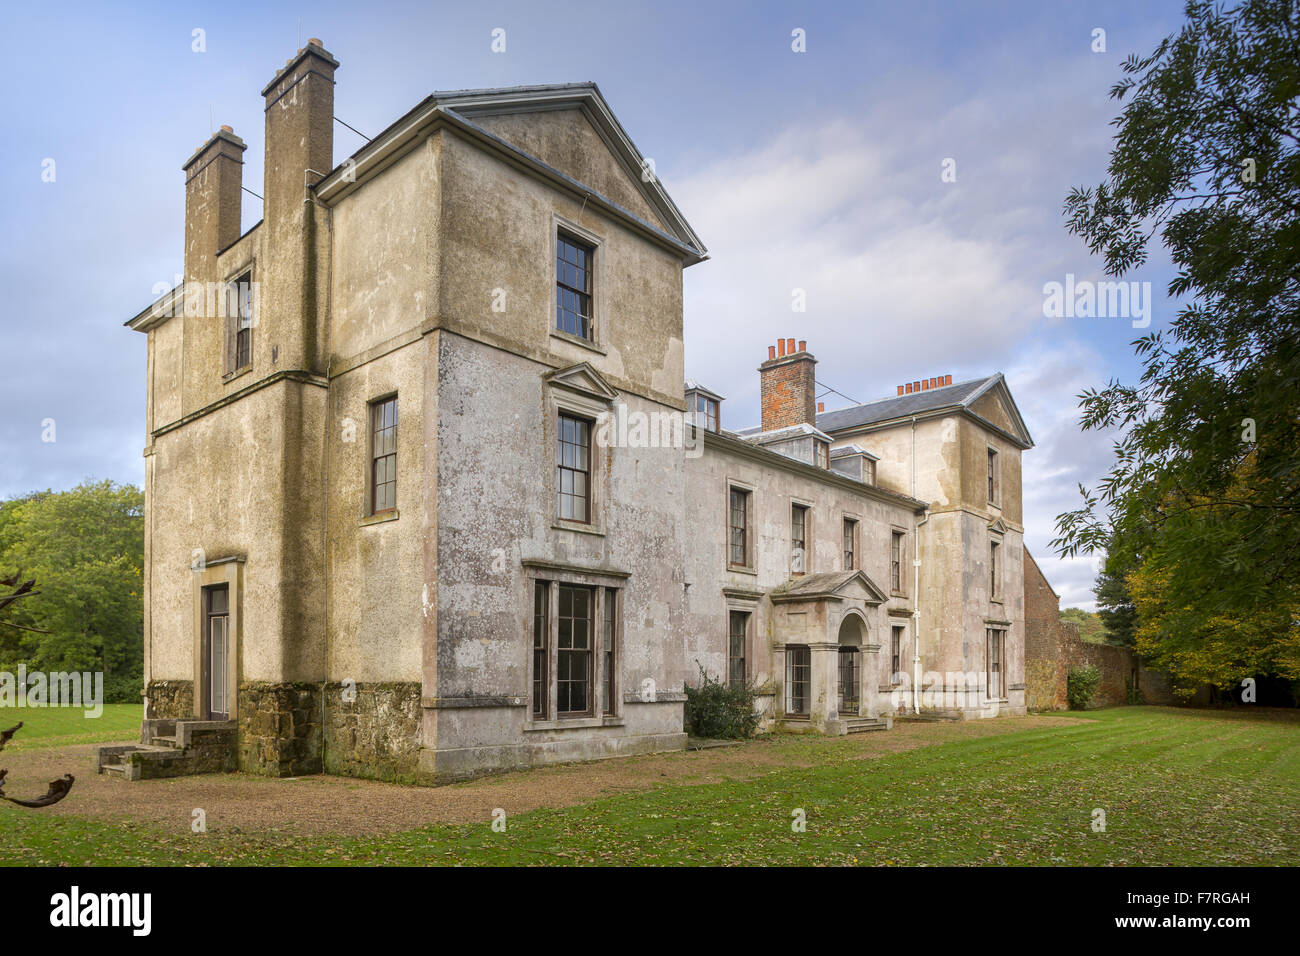 Leigh Hill Place, Surrey. Leigh Hill Place was the childhood home of the English composer Ralph Vaughan Williams, and was once owned by the Wedgwood family. Stock Photo